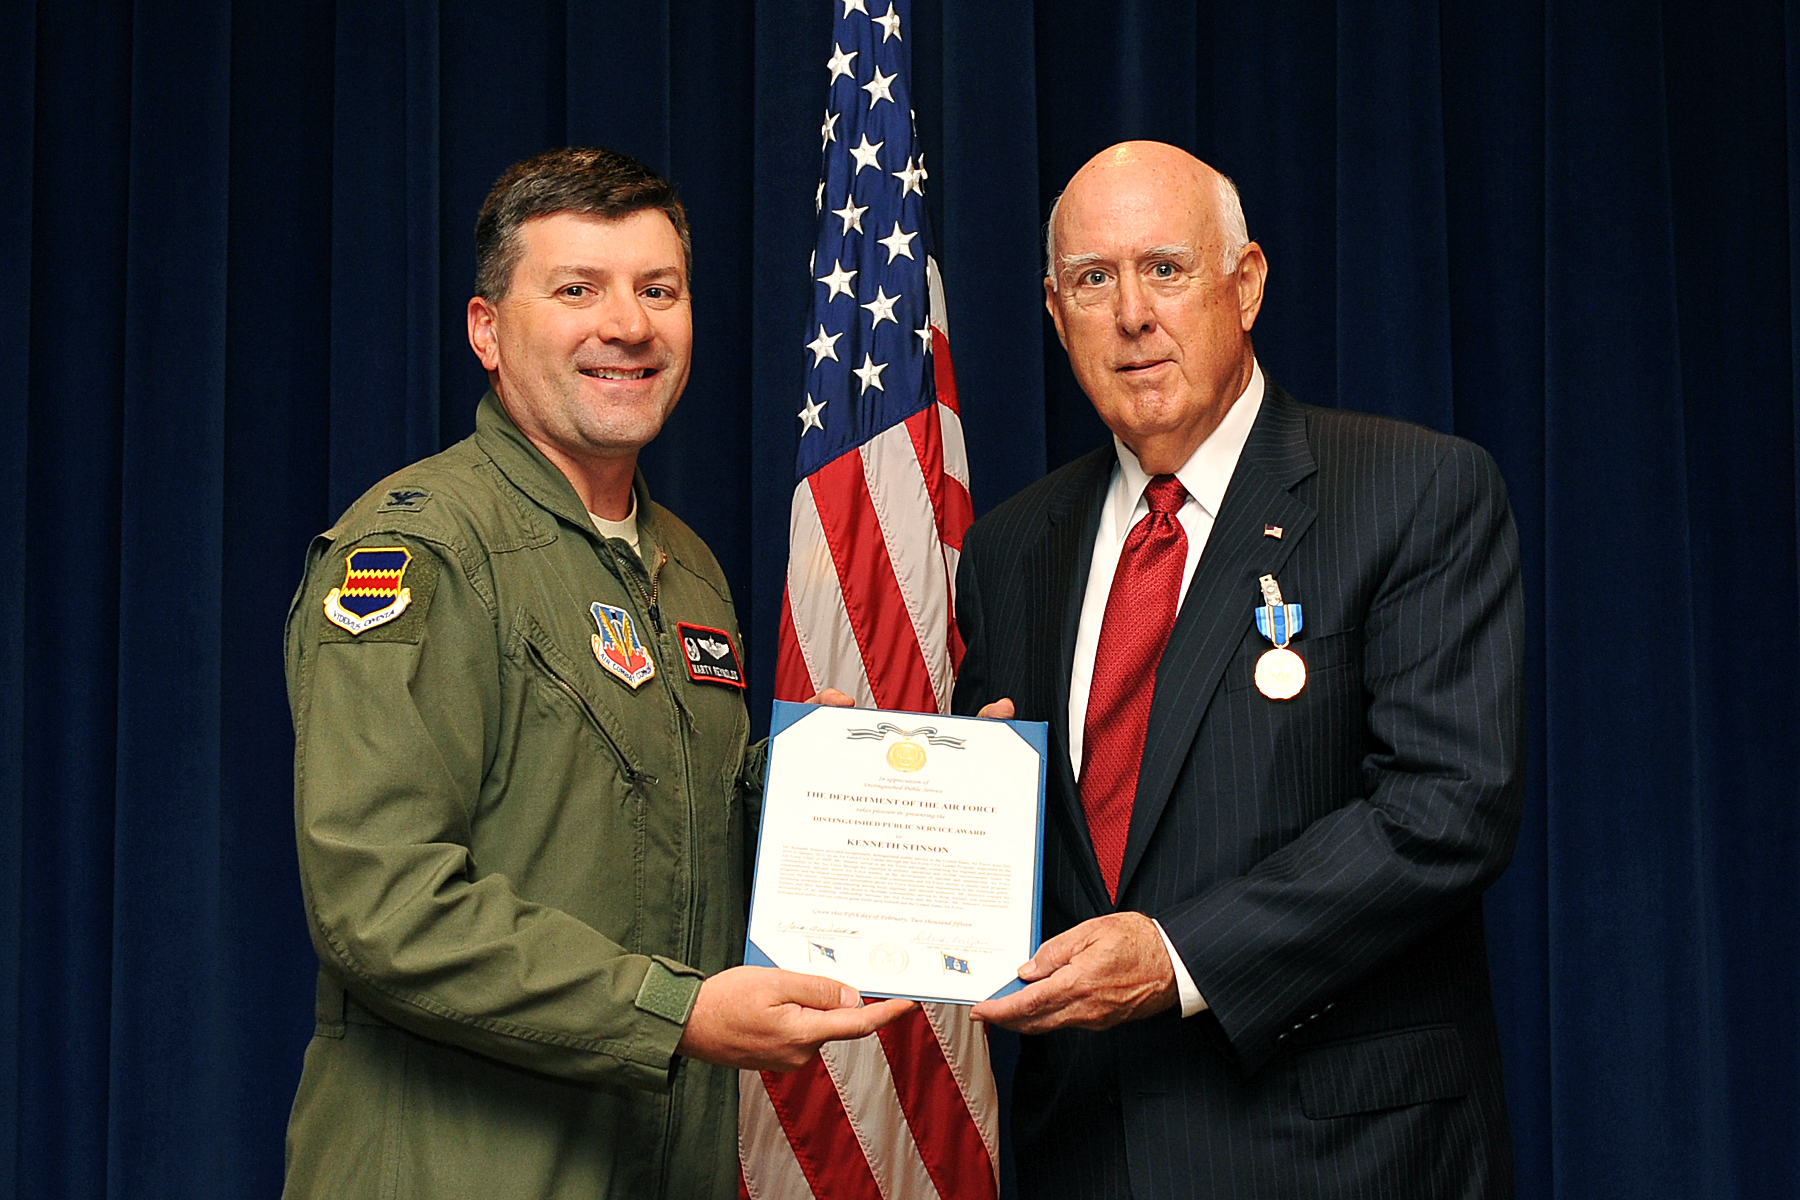 Local civic leader honored for service > Offutt Air Force Base ...